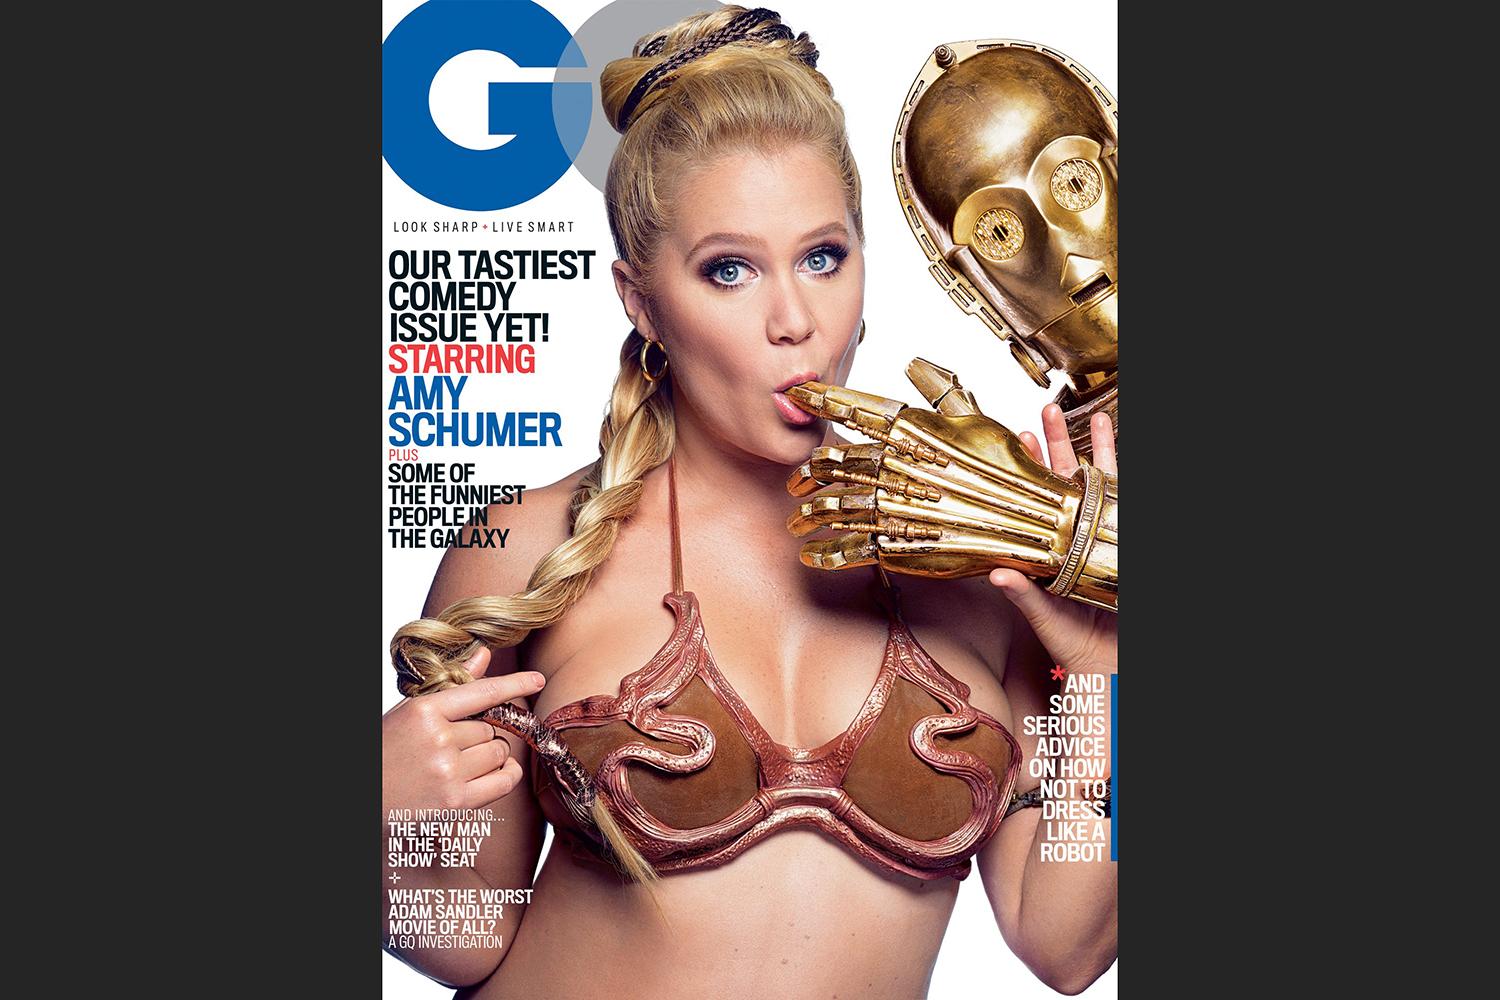 amy schumer risque star wars photo shoot gq is the funniest woman in galaxy  mark seliger cover